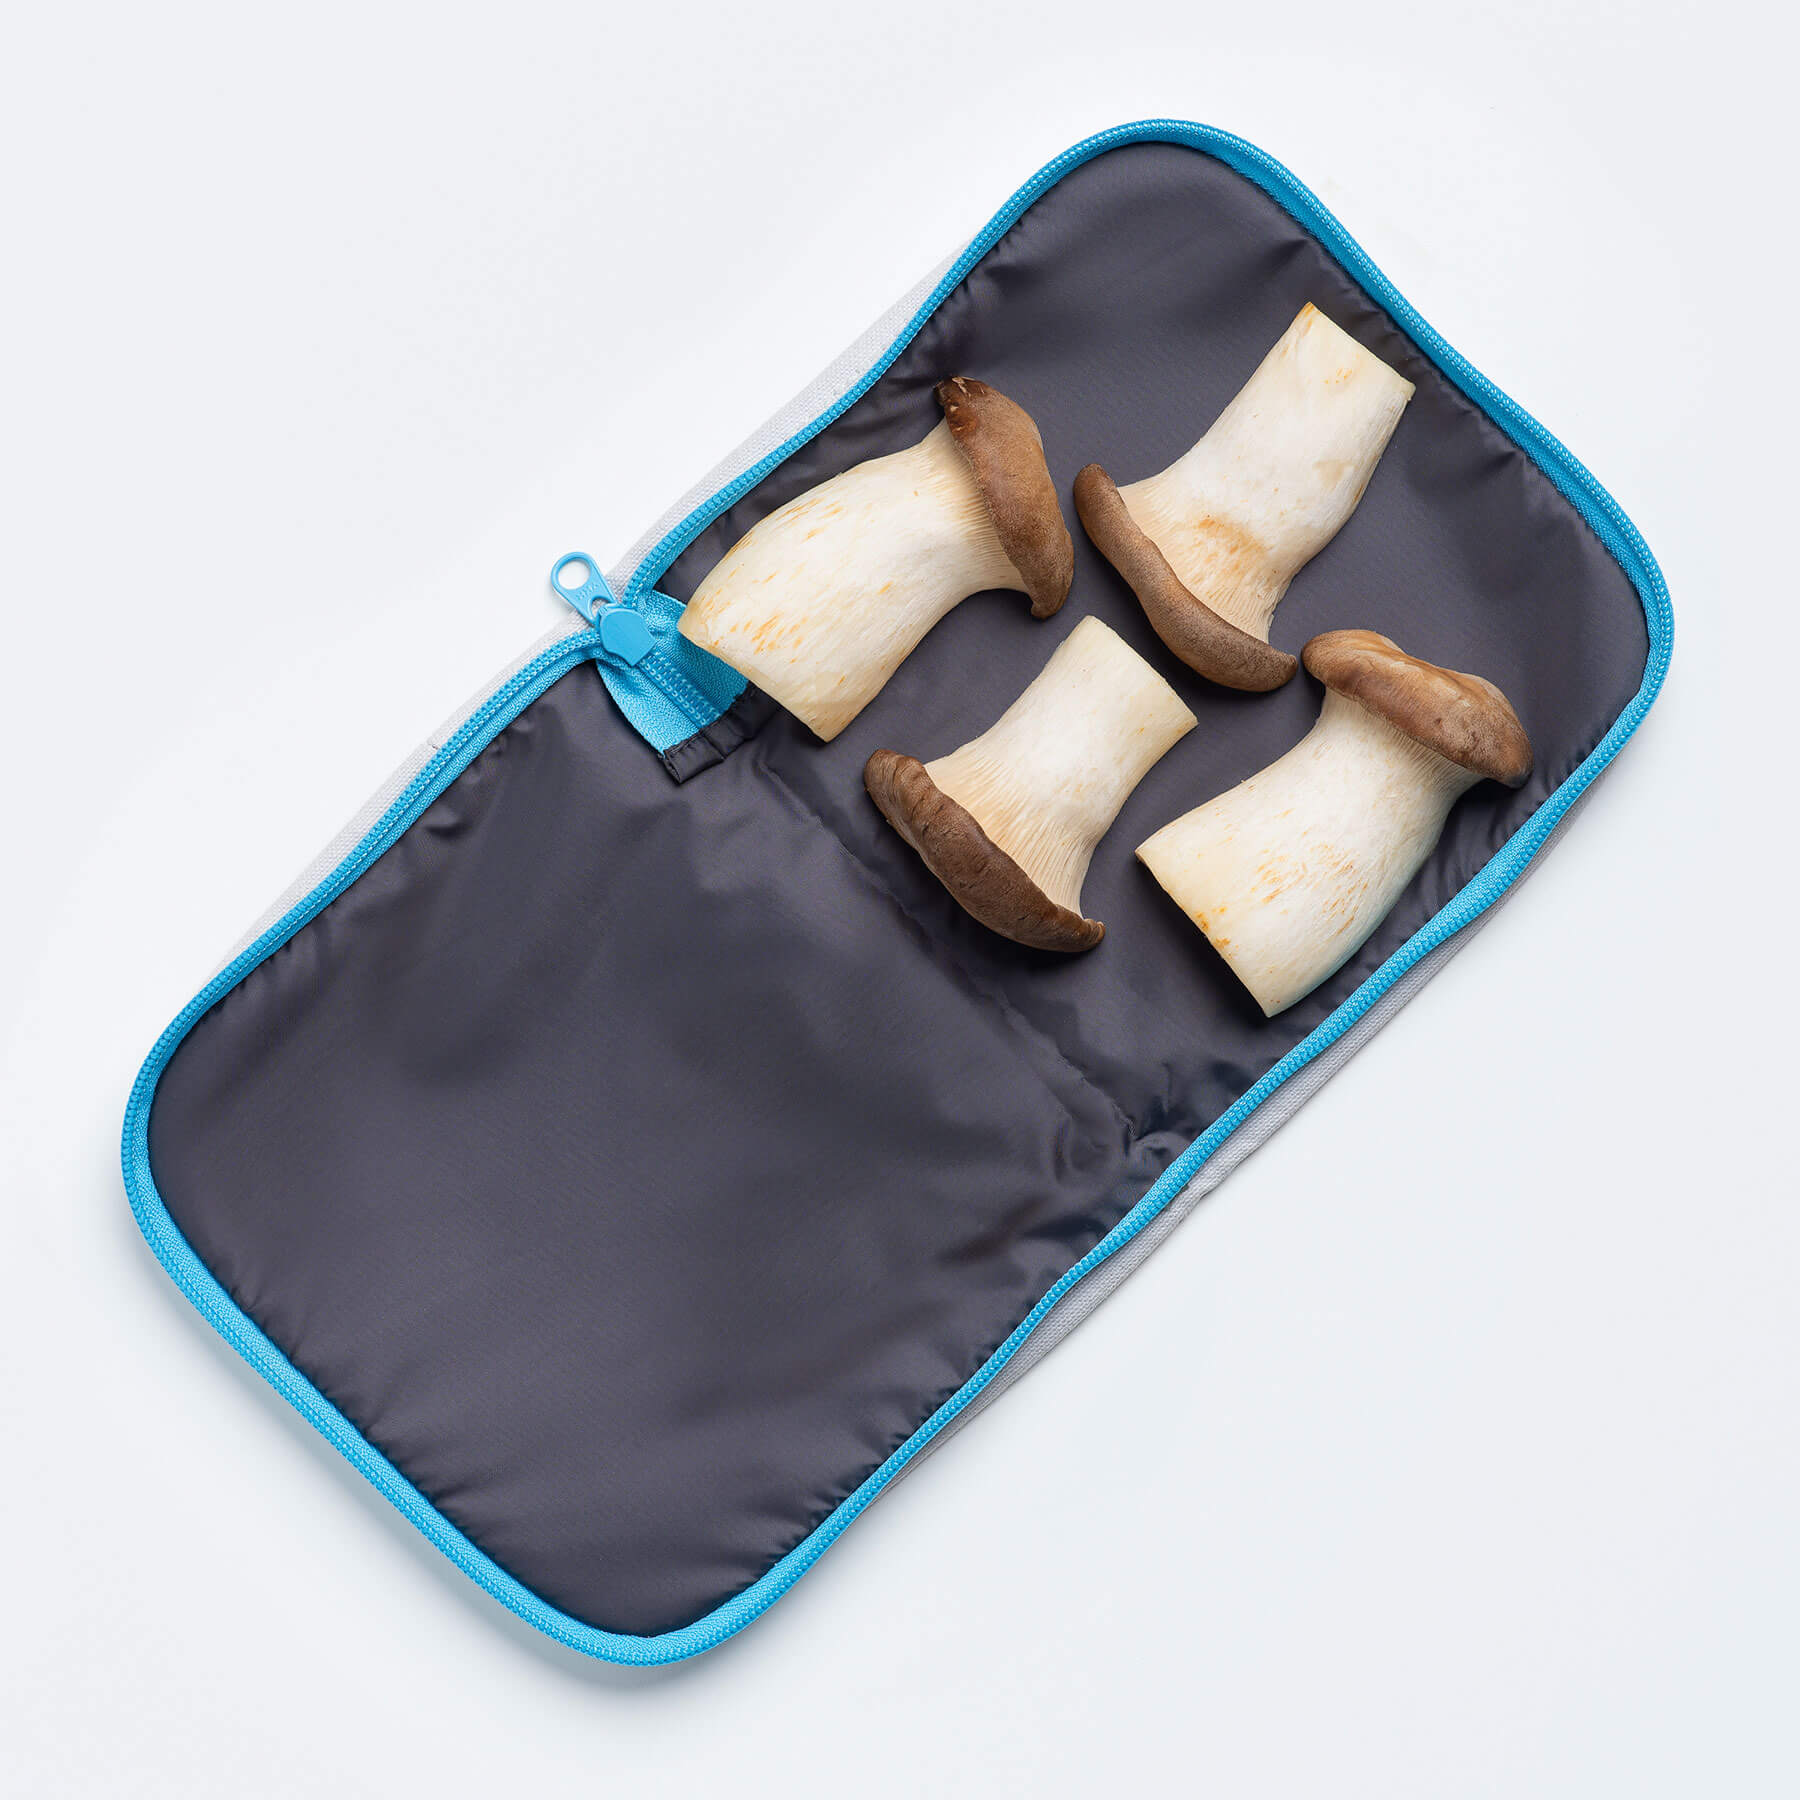 'Snack' Blue with Blue Zip Snack Pack